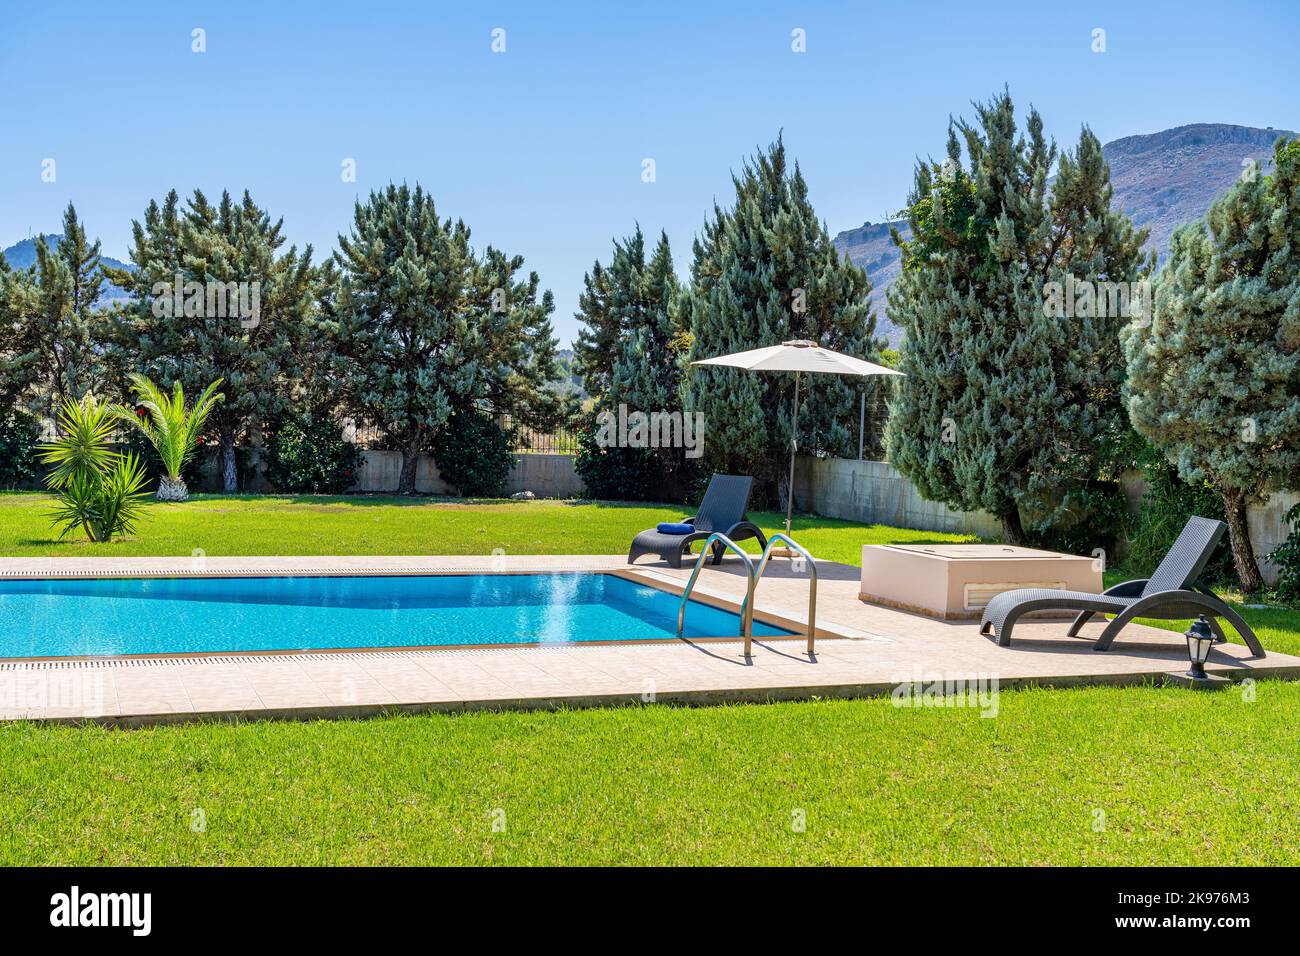 A swimming pool and deck Stock Photo